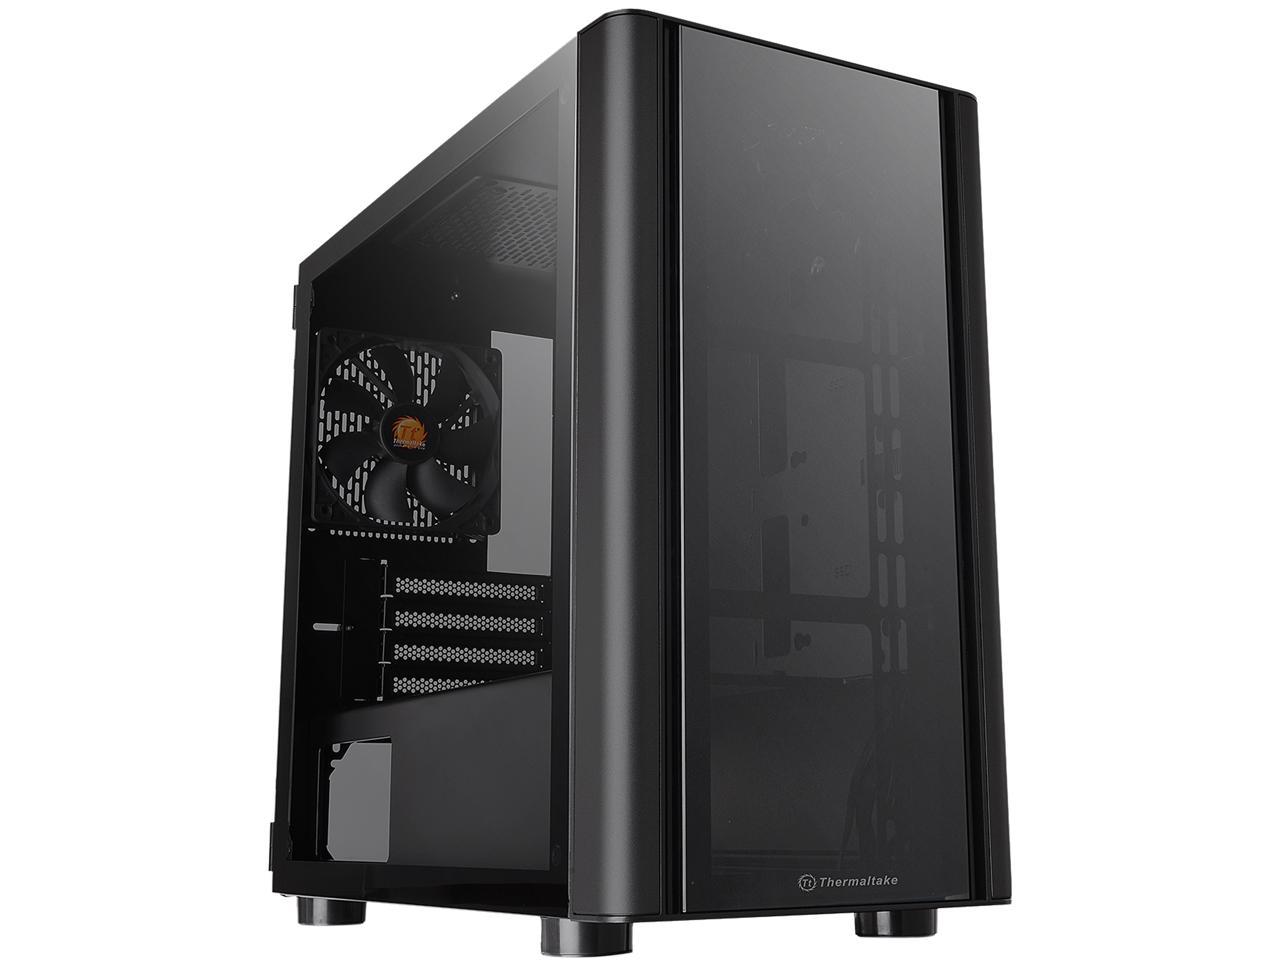 TPI DX-790 Home PC